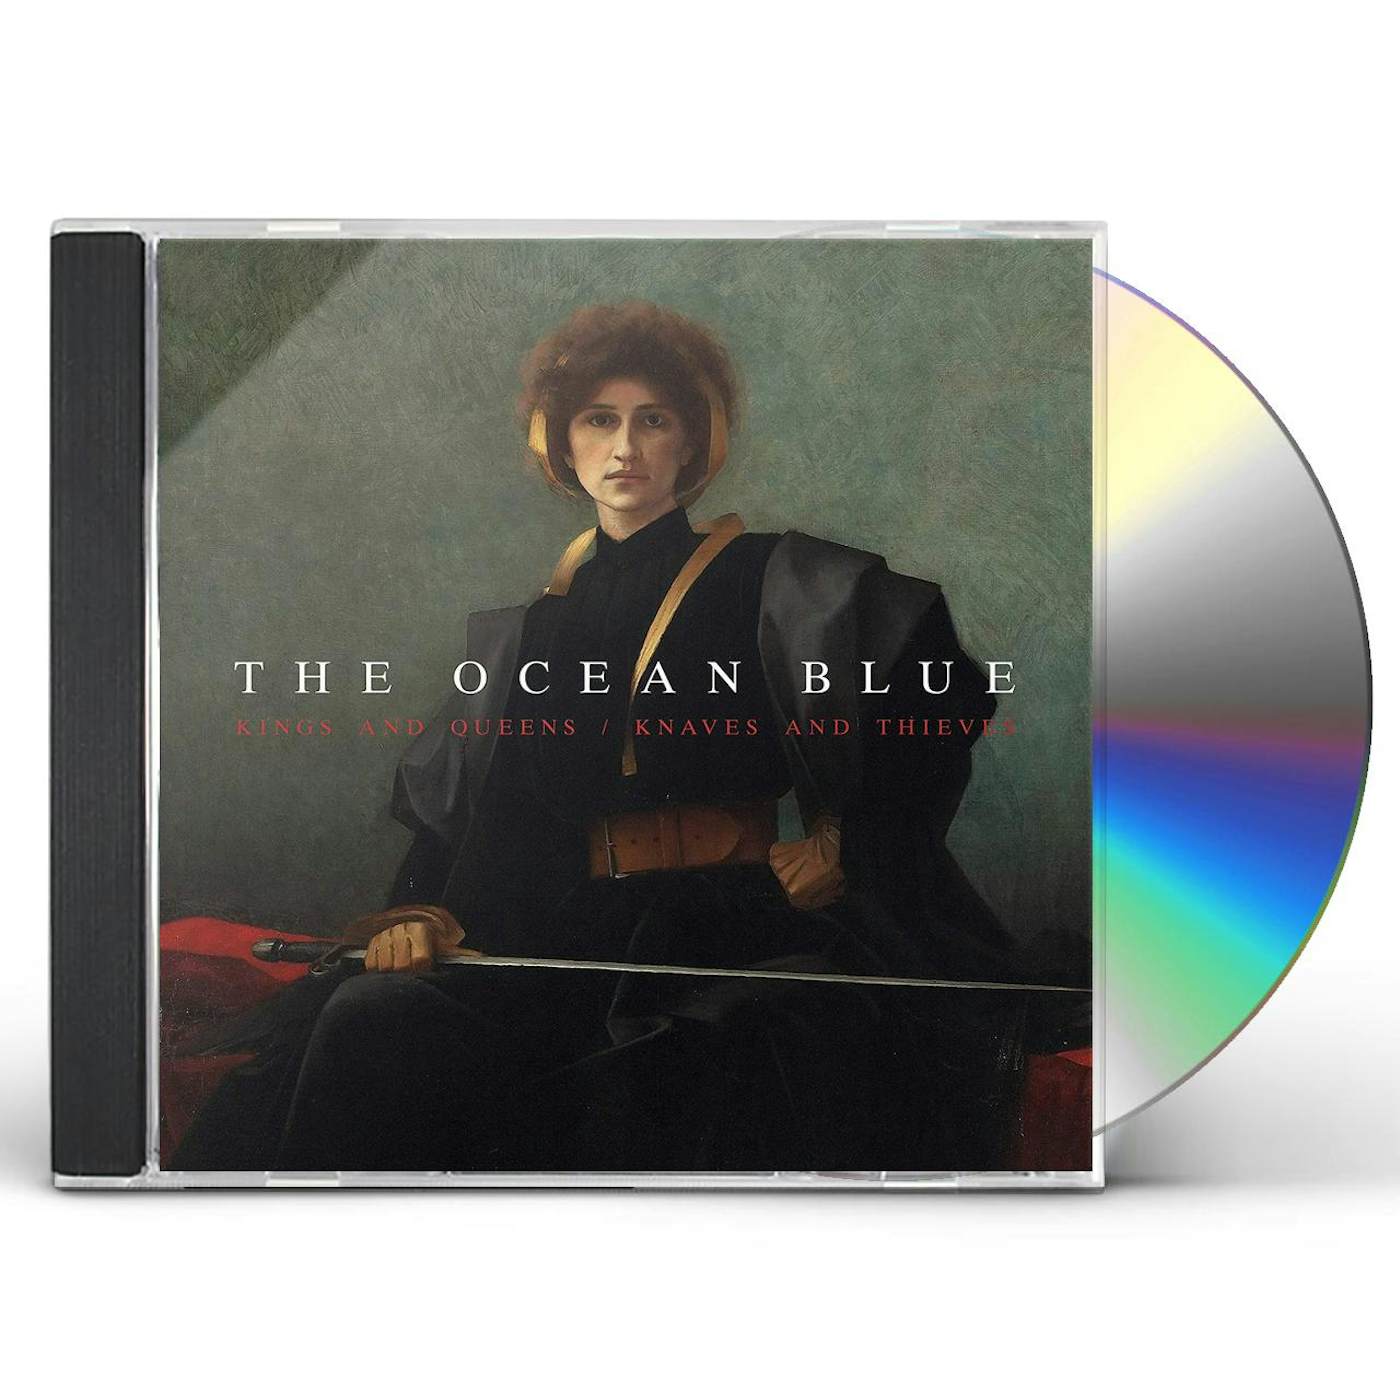 The Ocean Blue KINGS AND QUEENS / KNAVES AND THIEVES CD